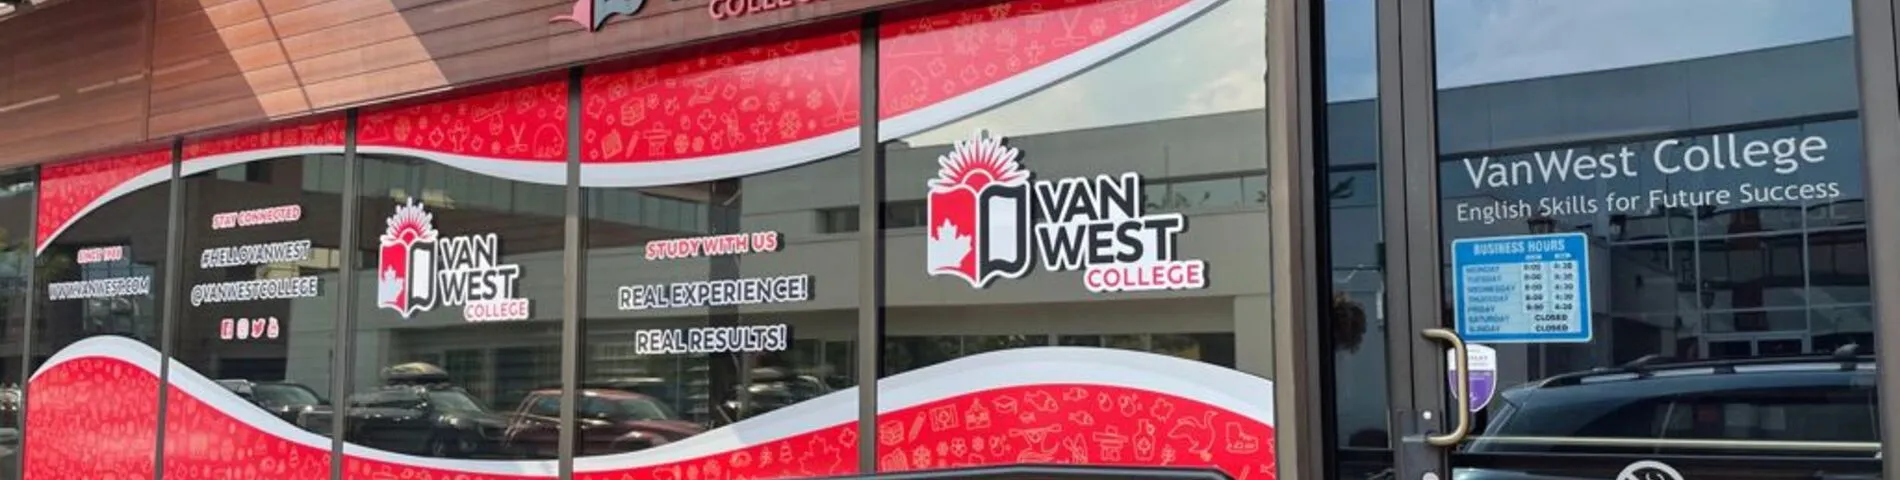 VanWest College picture 1